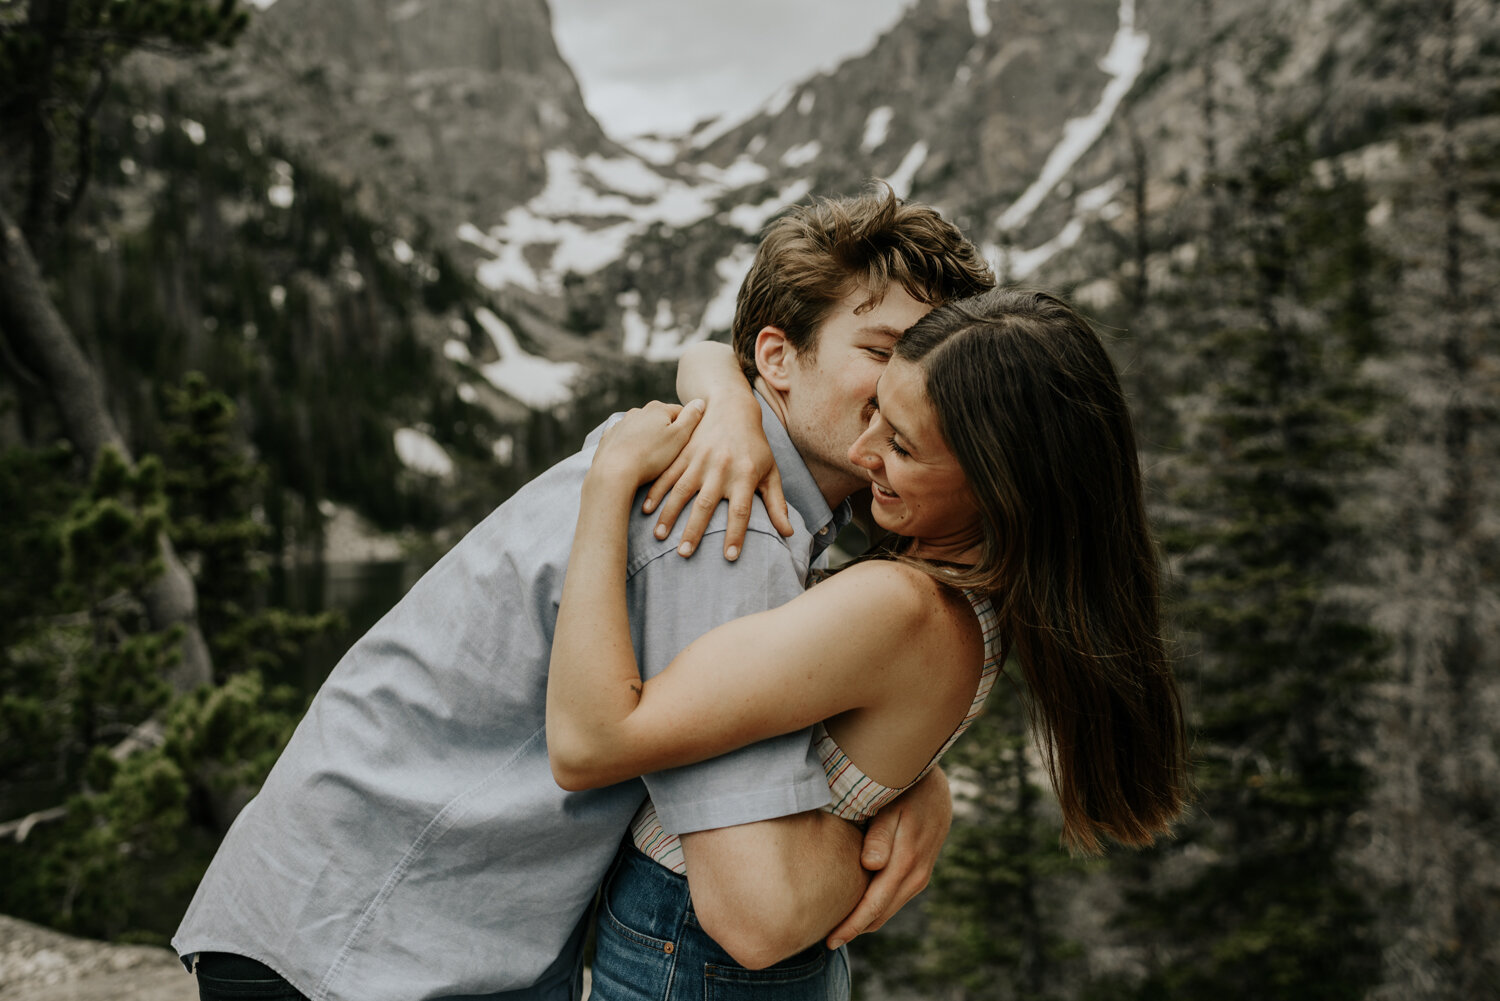 Dream Lake Engagement Photos in Rocky Mountain National Park, Colorado 